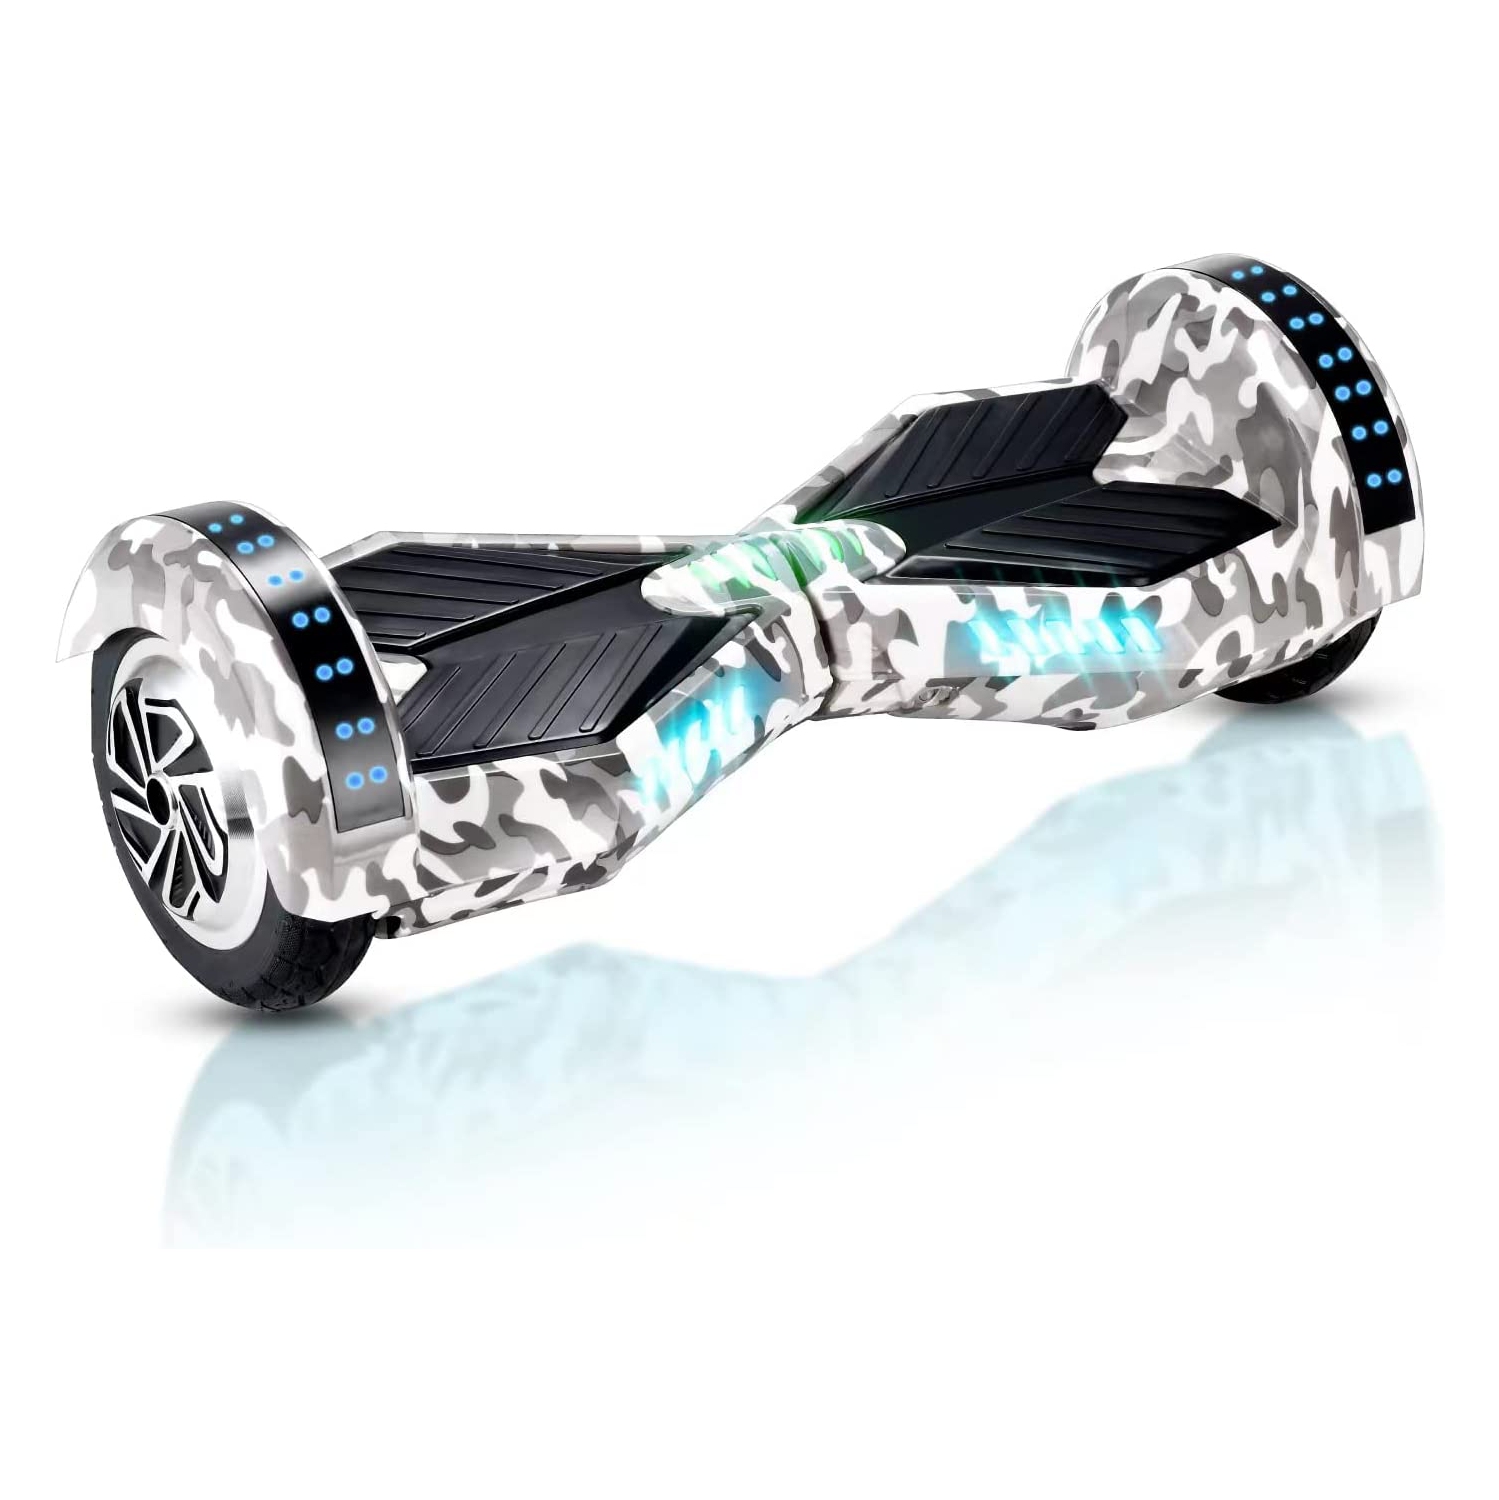 WEELMOTION CAMO 8" Off-Road Hoverboard UL 2272 certified Hoverboard for Kids and Adults with LED lights and Music Speaker 300W All Terrain Aluminum Wheel with free Hoverboard bag